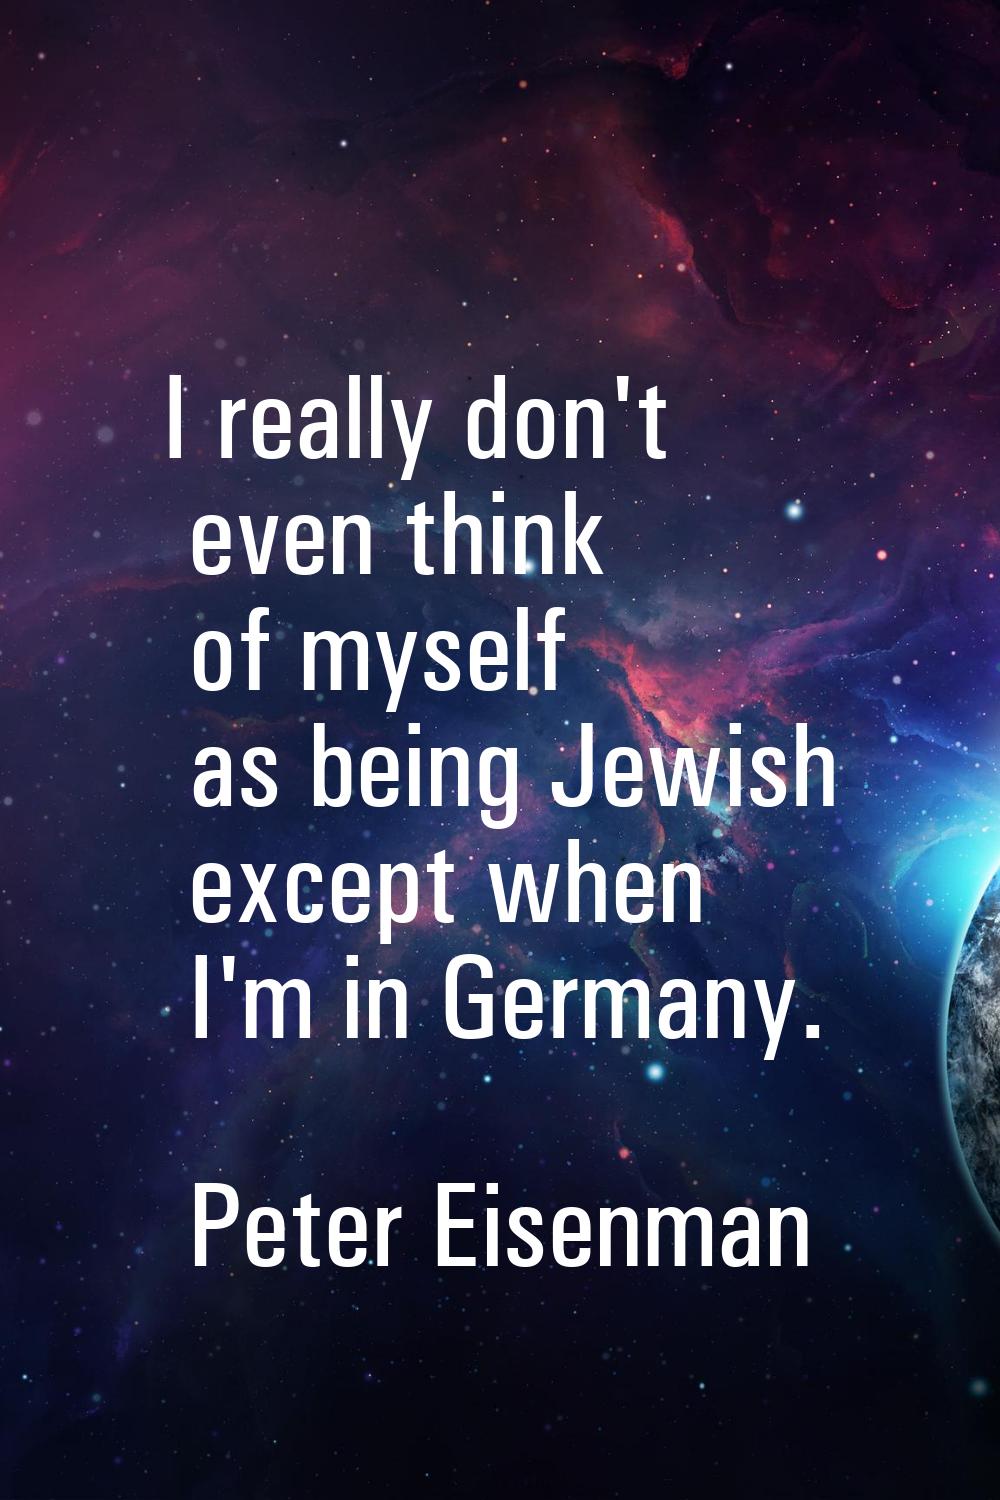 I really don't even think of myself as being Jewish except when I'm in Germany.